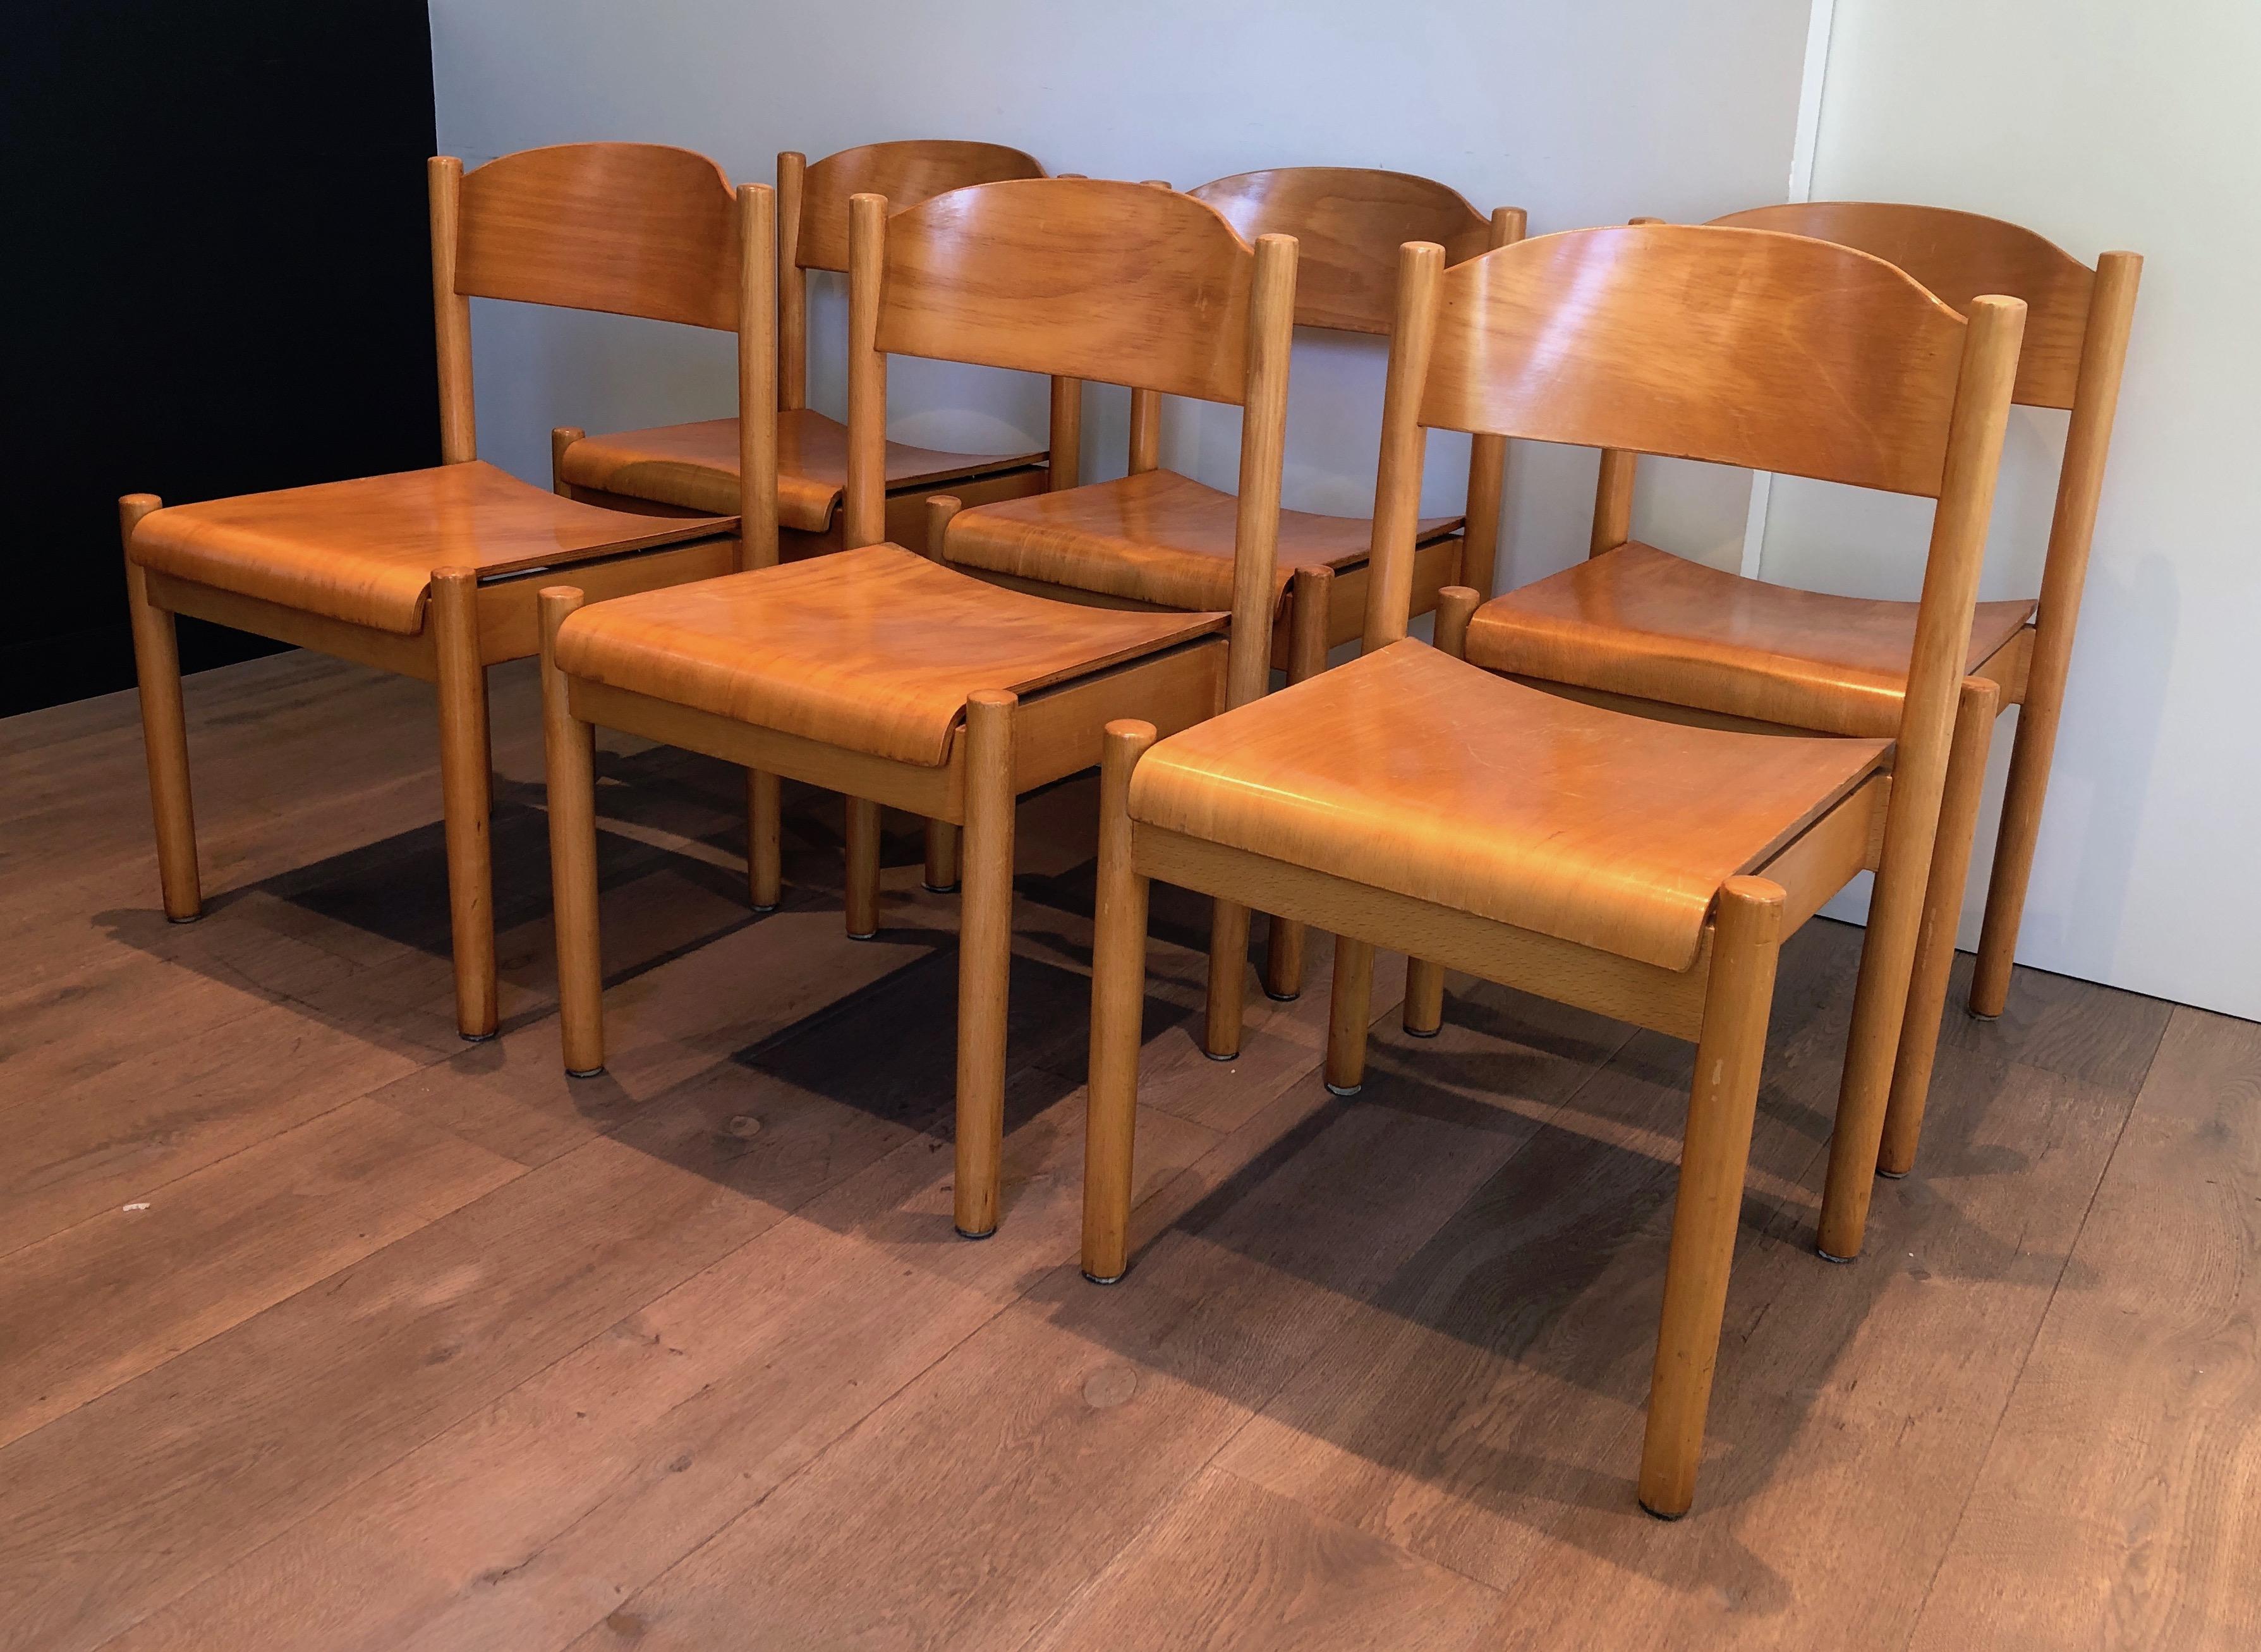 Set of 6 Stackable Pine Chairs, German Work by Karl Klipper, Circa 1970 For Sale 5